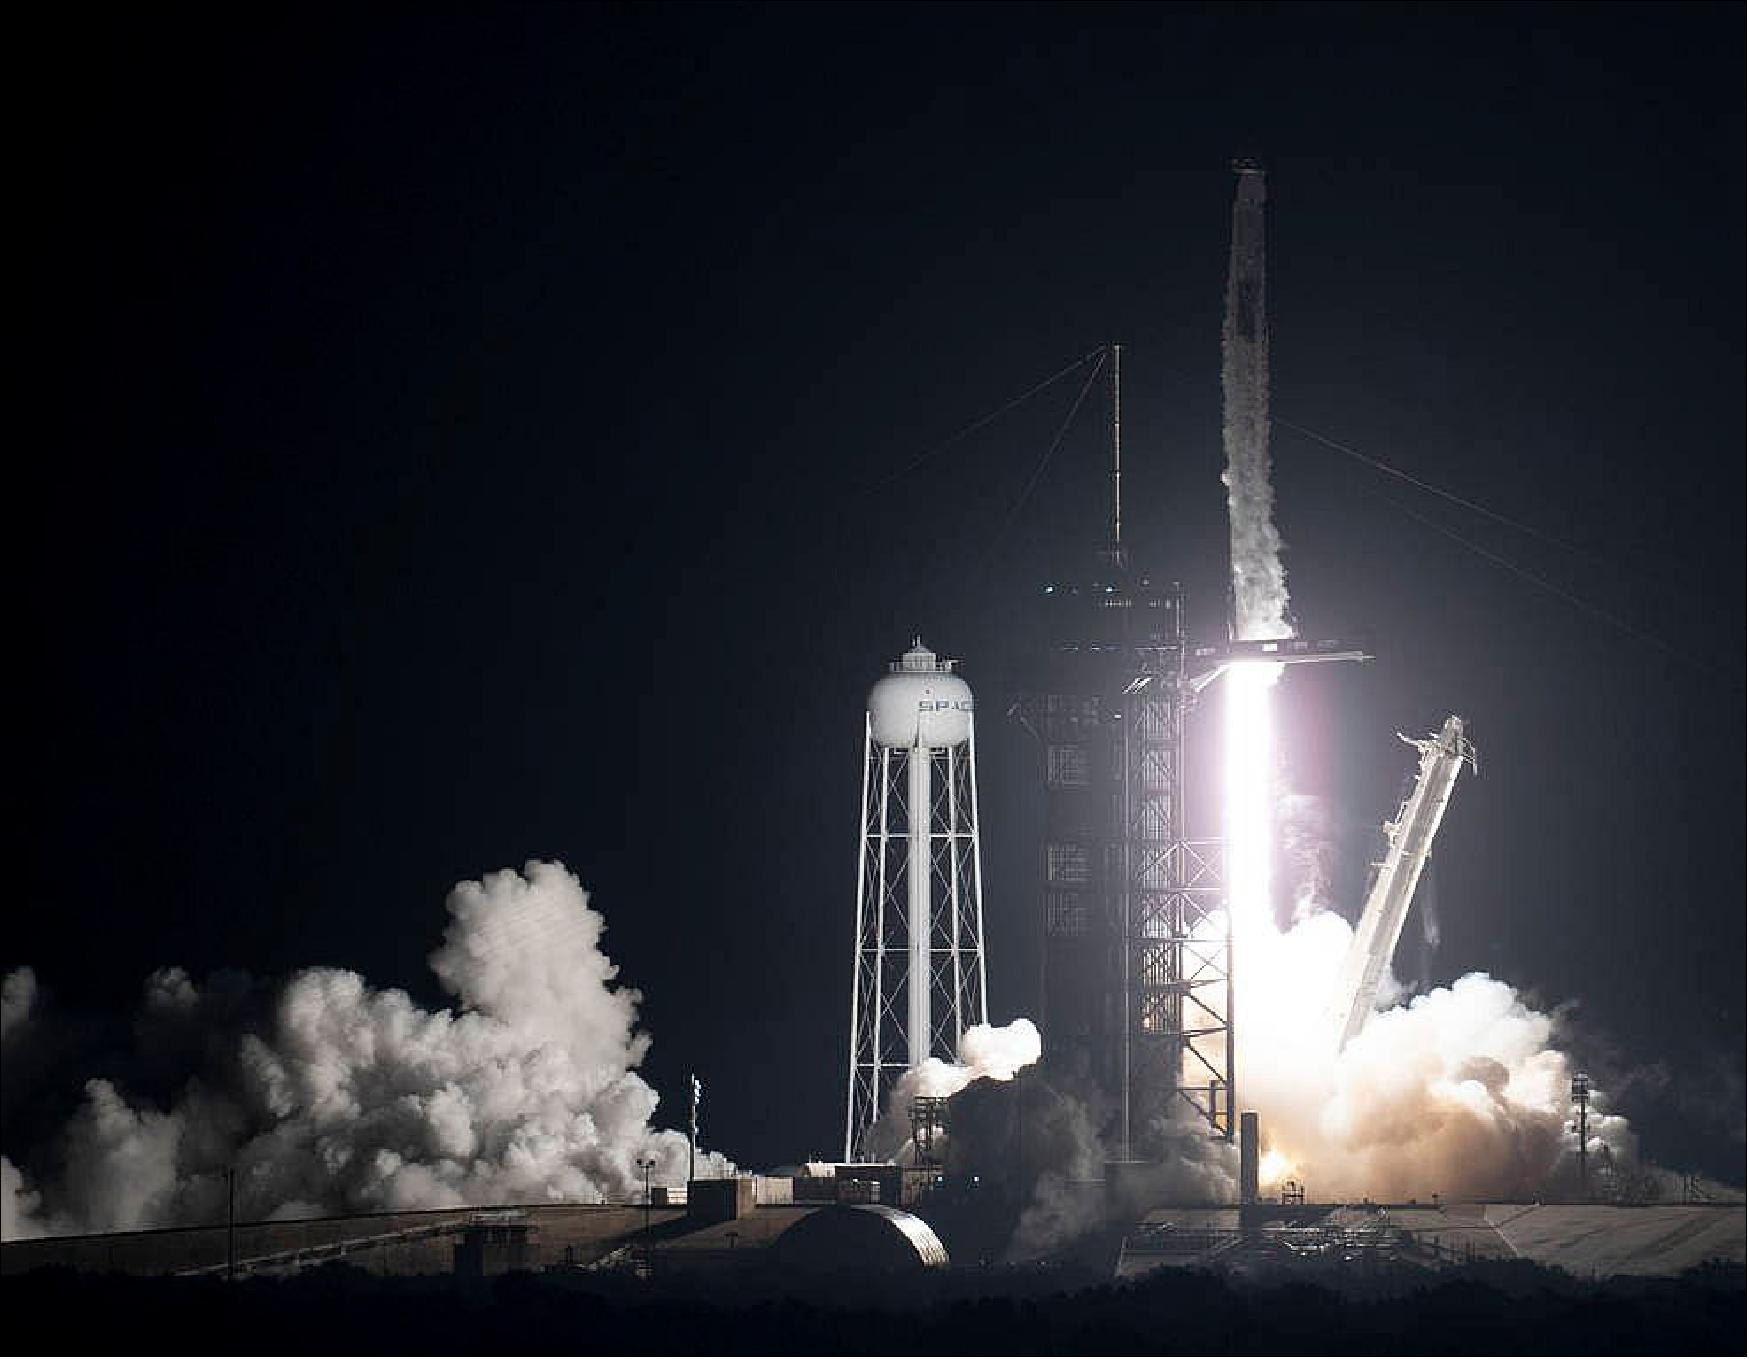 Figure 4: A SpaceX Falcon 9 rocket carrying the company's Crew Dragon spacecraft is launched on NASA’s SpaceX Crew-3 mission to the ISS with NASA astronauts Raja Chari, Tom Marshburn, Kayla Barron, and ESA (European Space Agency) astronaut Matthias Maurer onboard (image credits: NASA, Joel Kowsky)